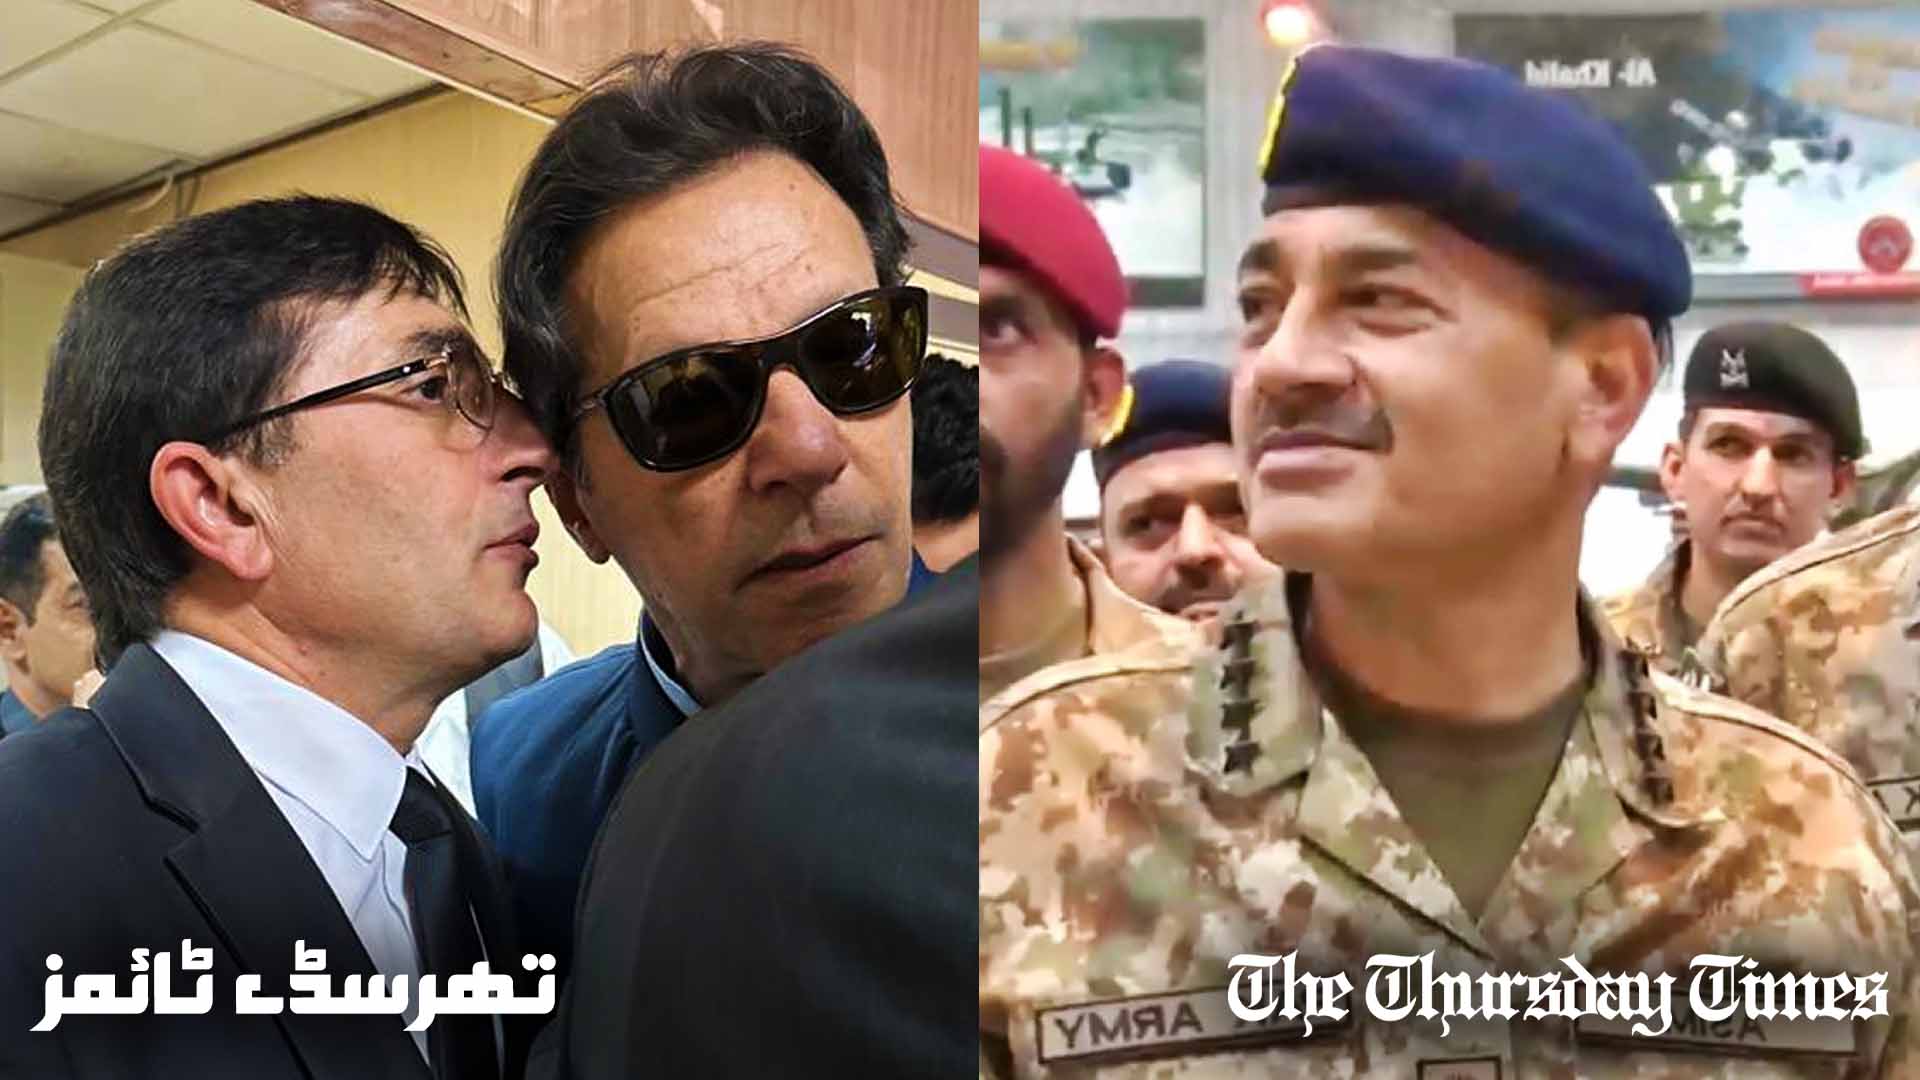 A combined file photo is shown of incumbent PTI chair Barrister Gohar Khan (L) with PTI founder Imran Khan (C), alongside a file photo of General Asim Munir, the incumbent COAS of Pakistan. — FILE/THE THURSDAY TIMES